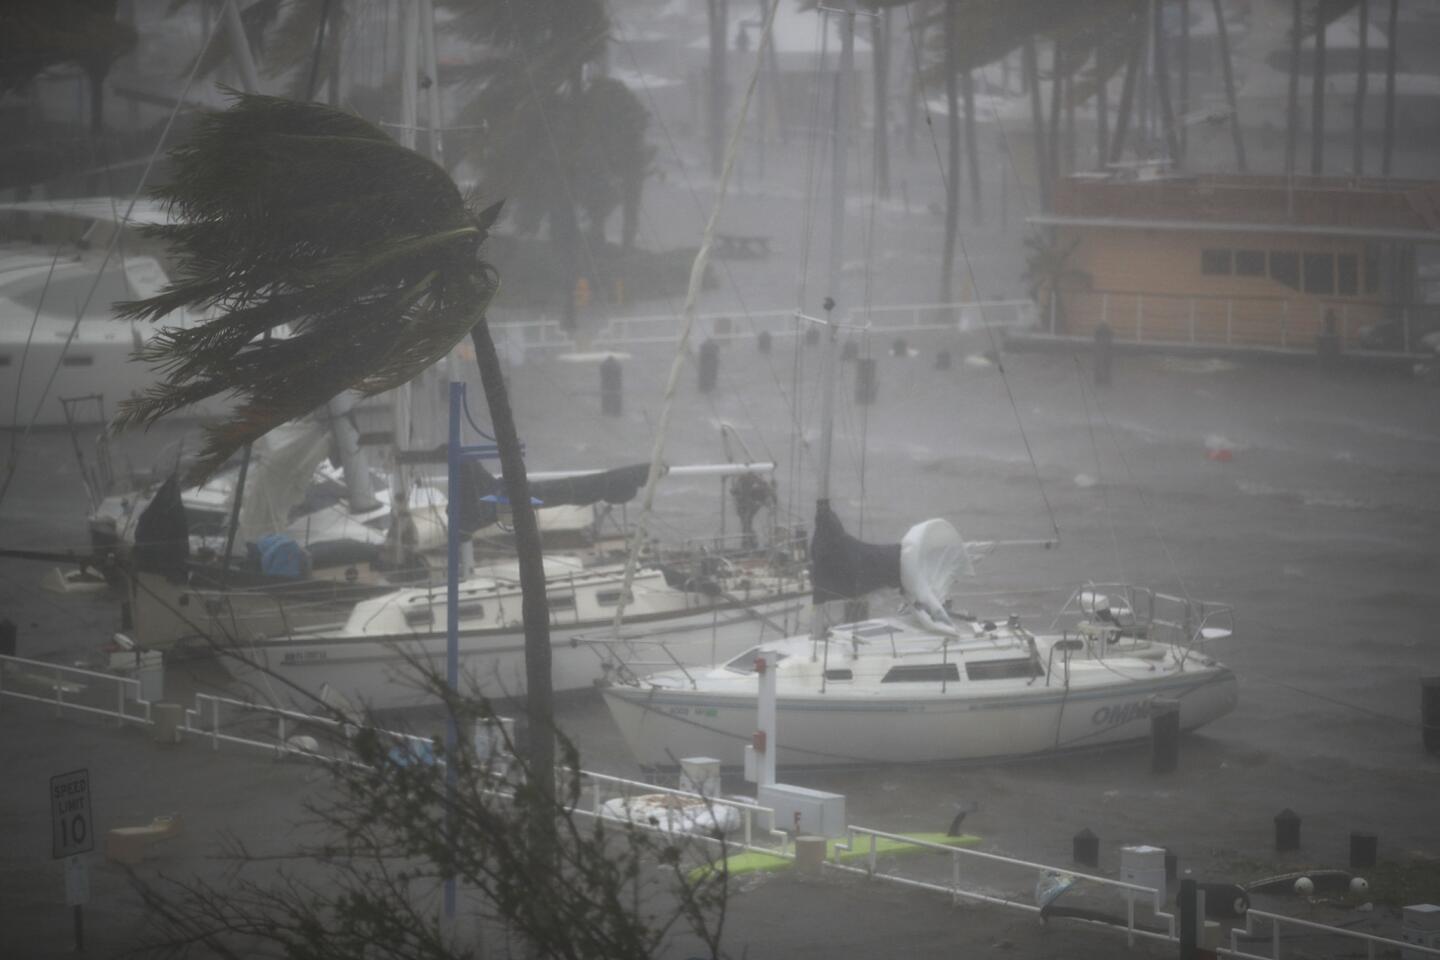 Boats ride out Hurricane Irma in a marina on Sept. 10, 2017, in Miami.